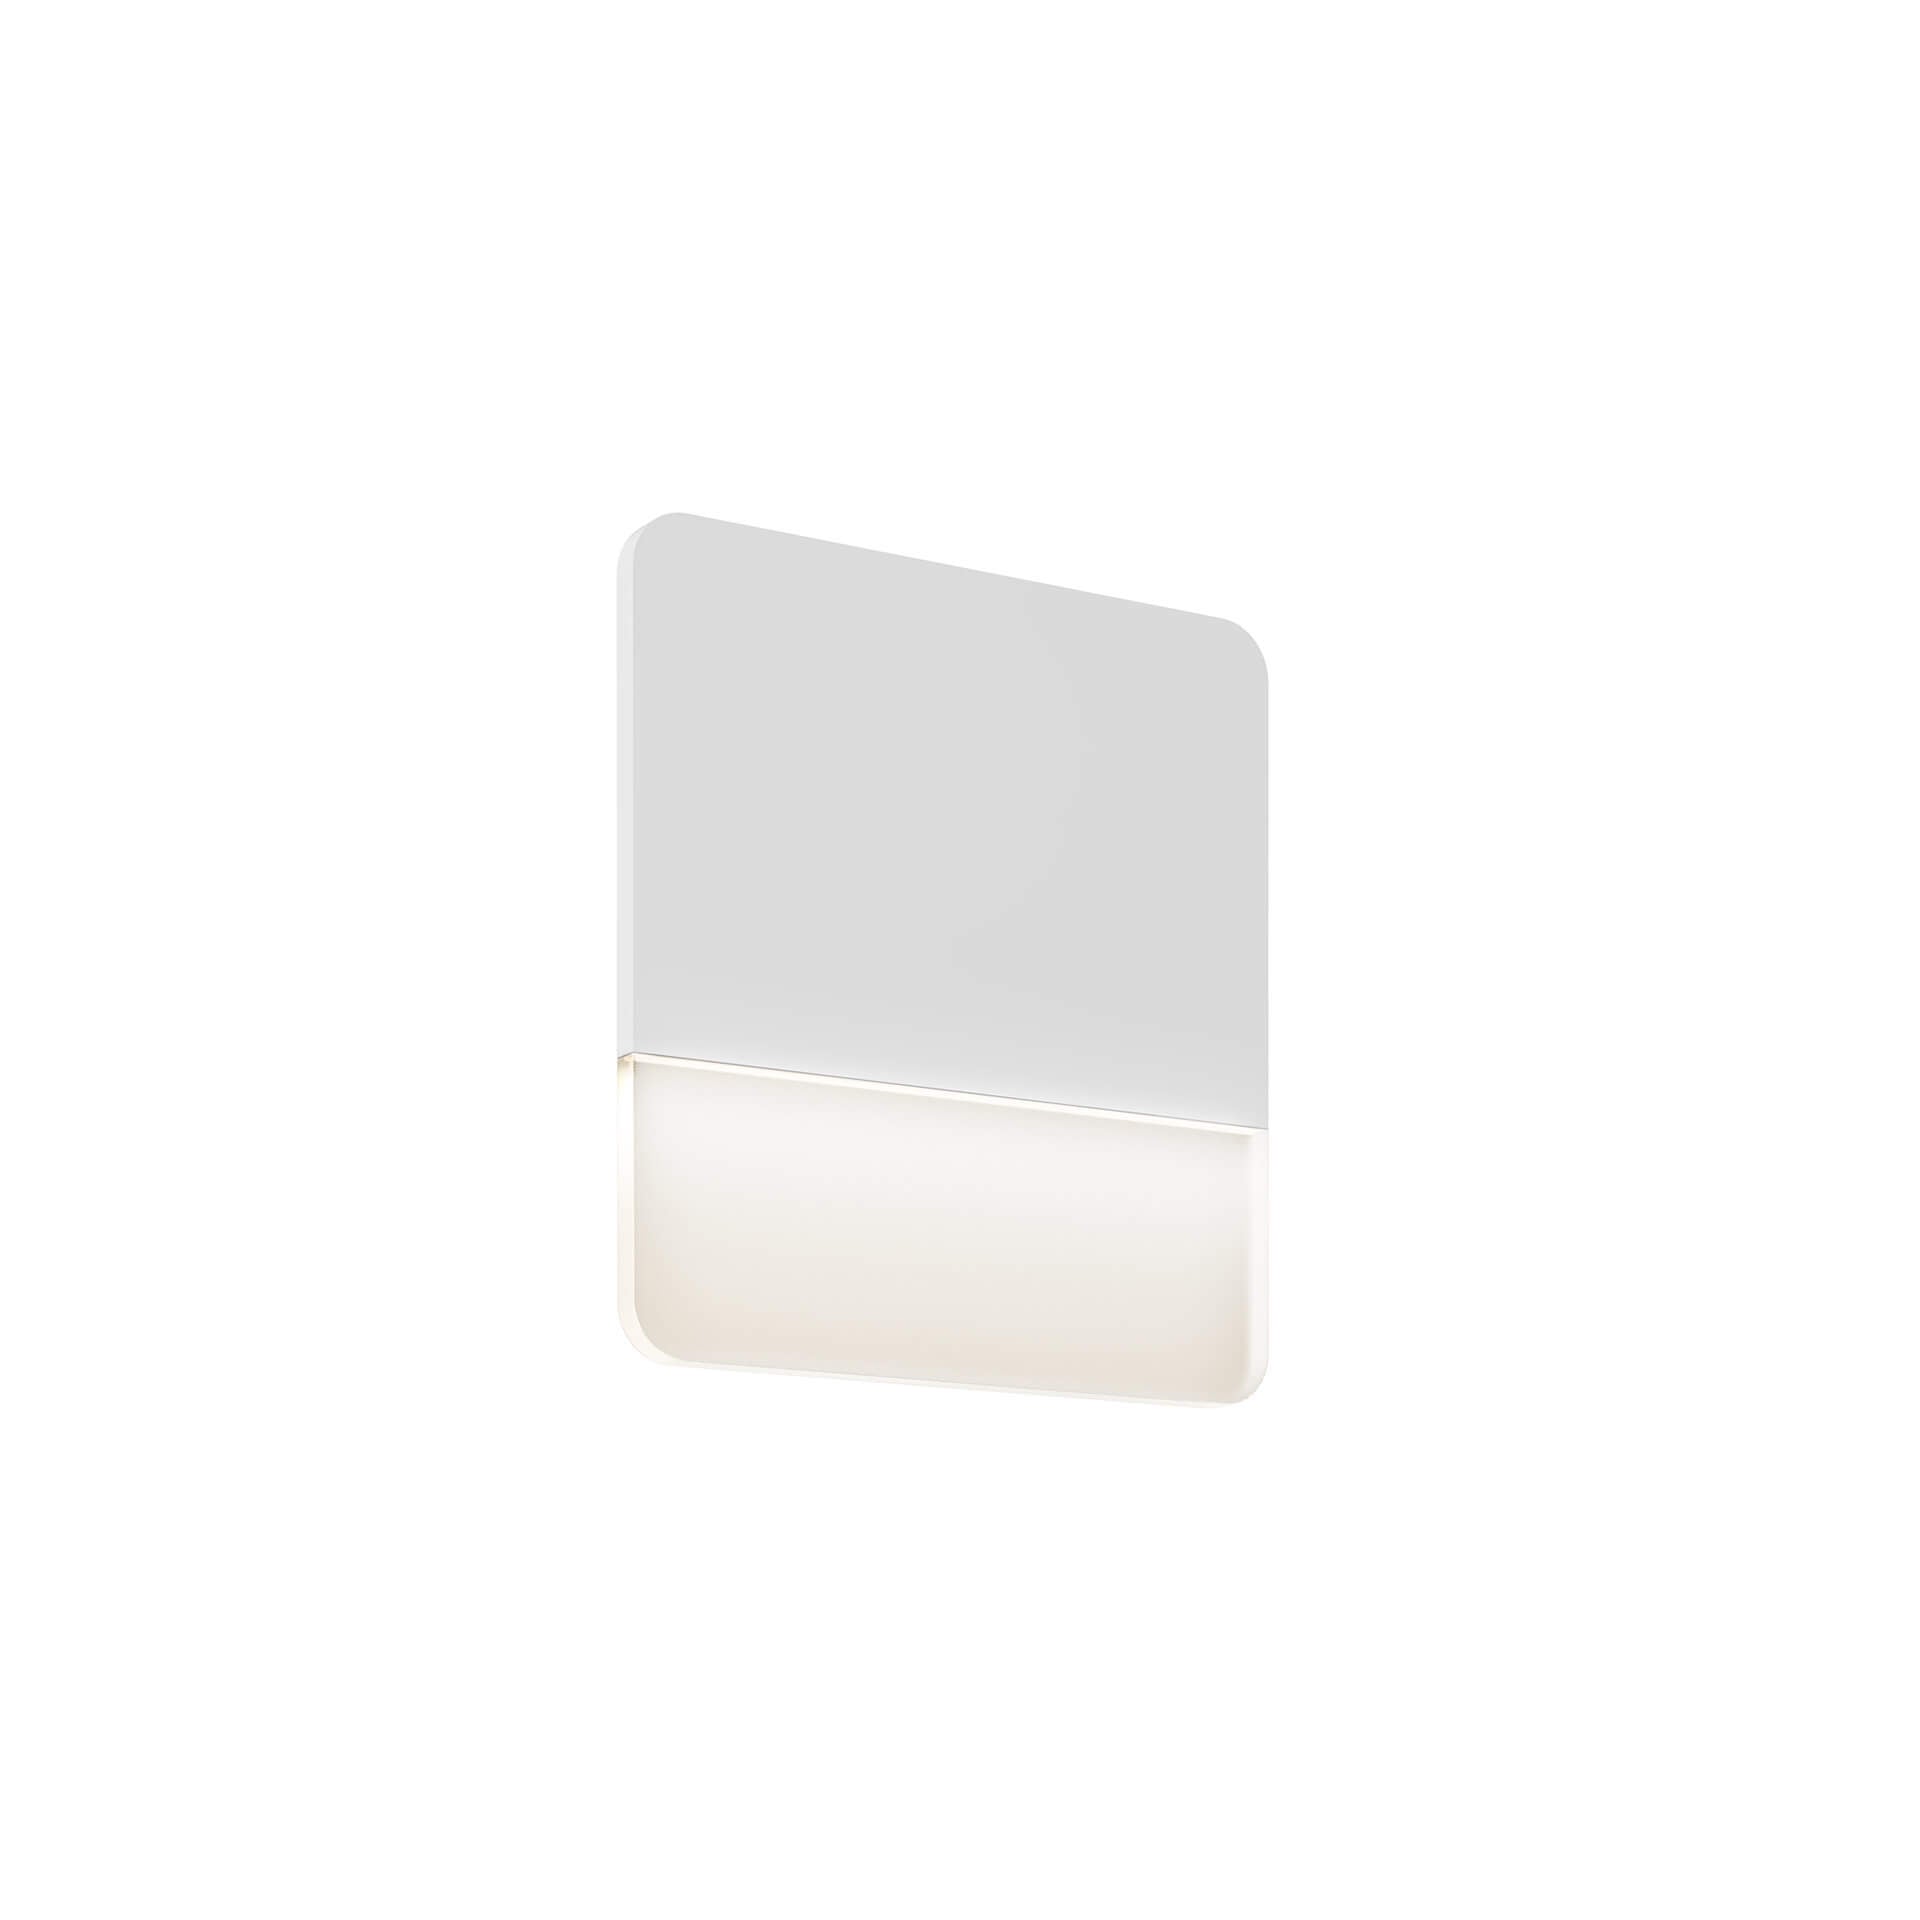 ALTO Outdoor wall lighting White INTEGRATED LED - SQS10-3K-WH | DALS